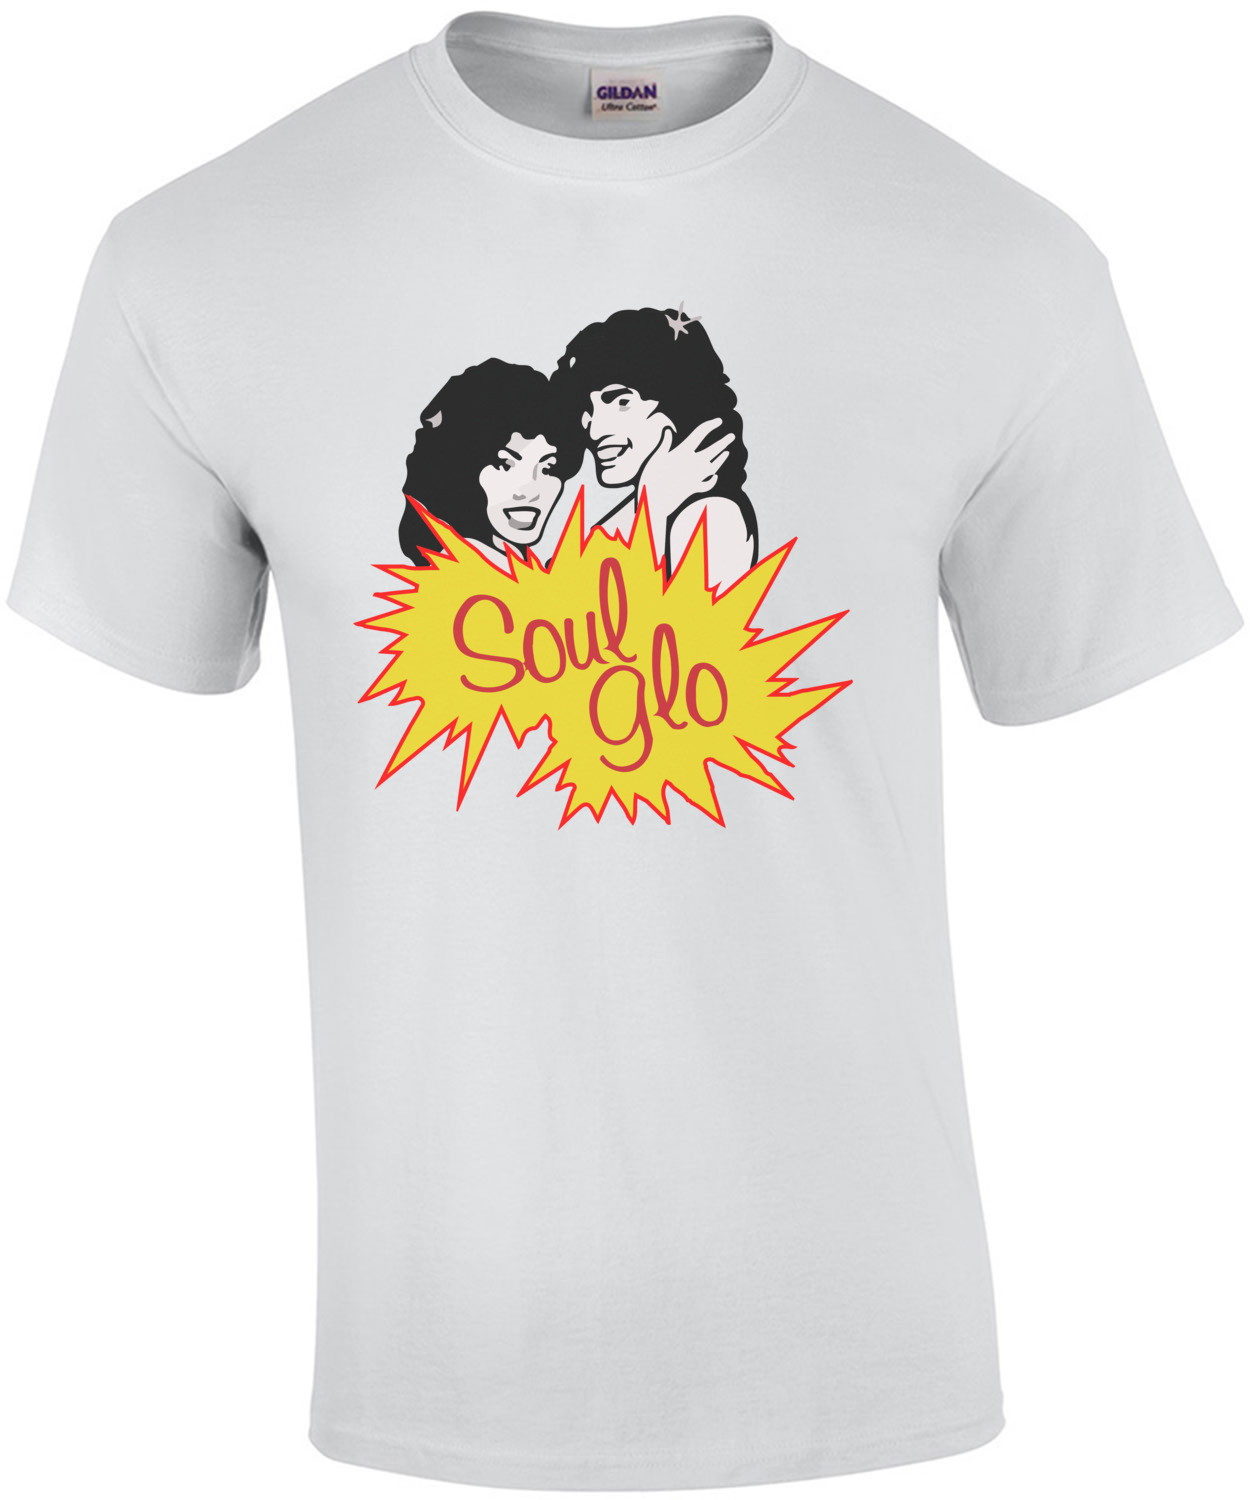 Soul Glo - Coming To America - Funny T-Shirt